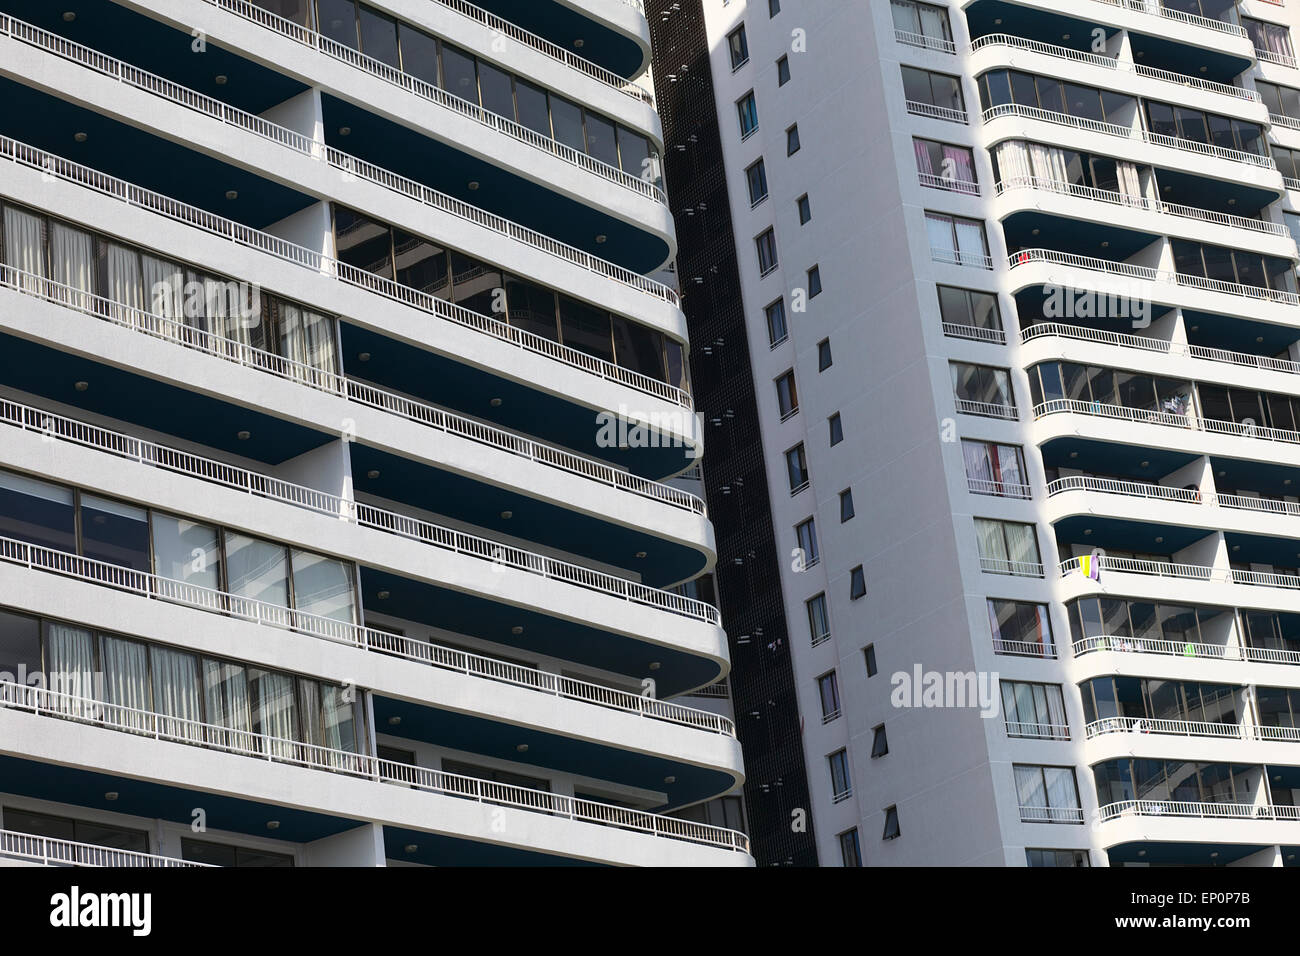 Detail of the modern residential building complex called Archipielago Mar Egeo in Iquique, Chile Stock Photo